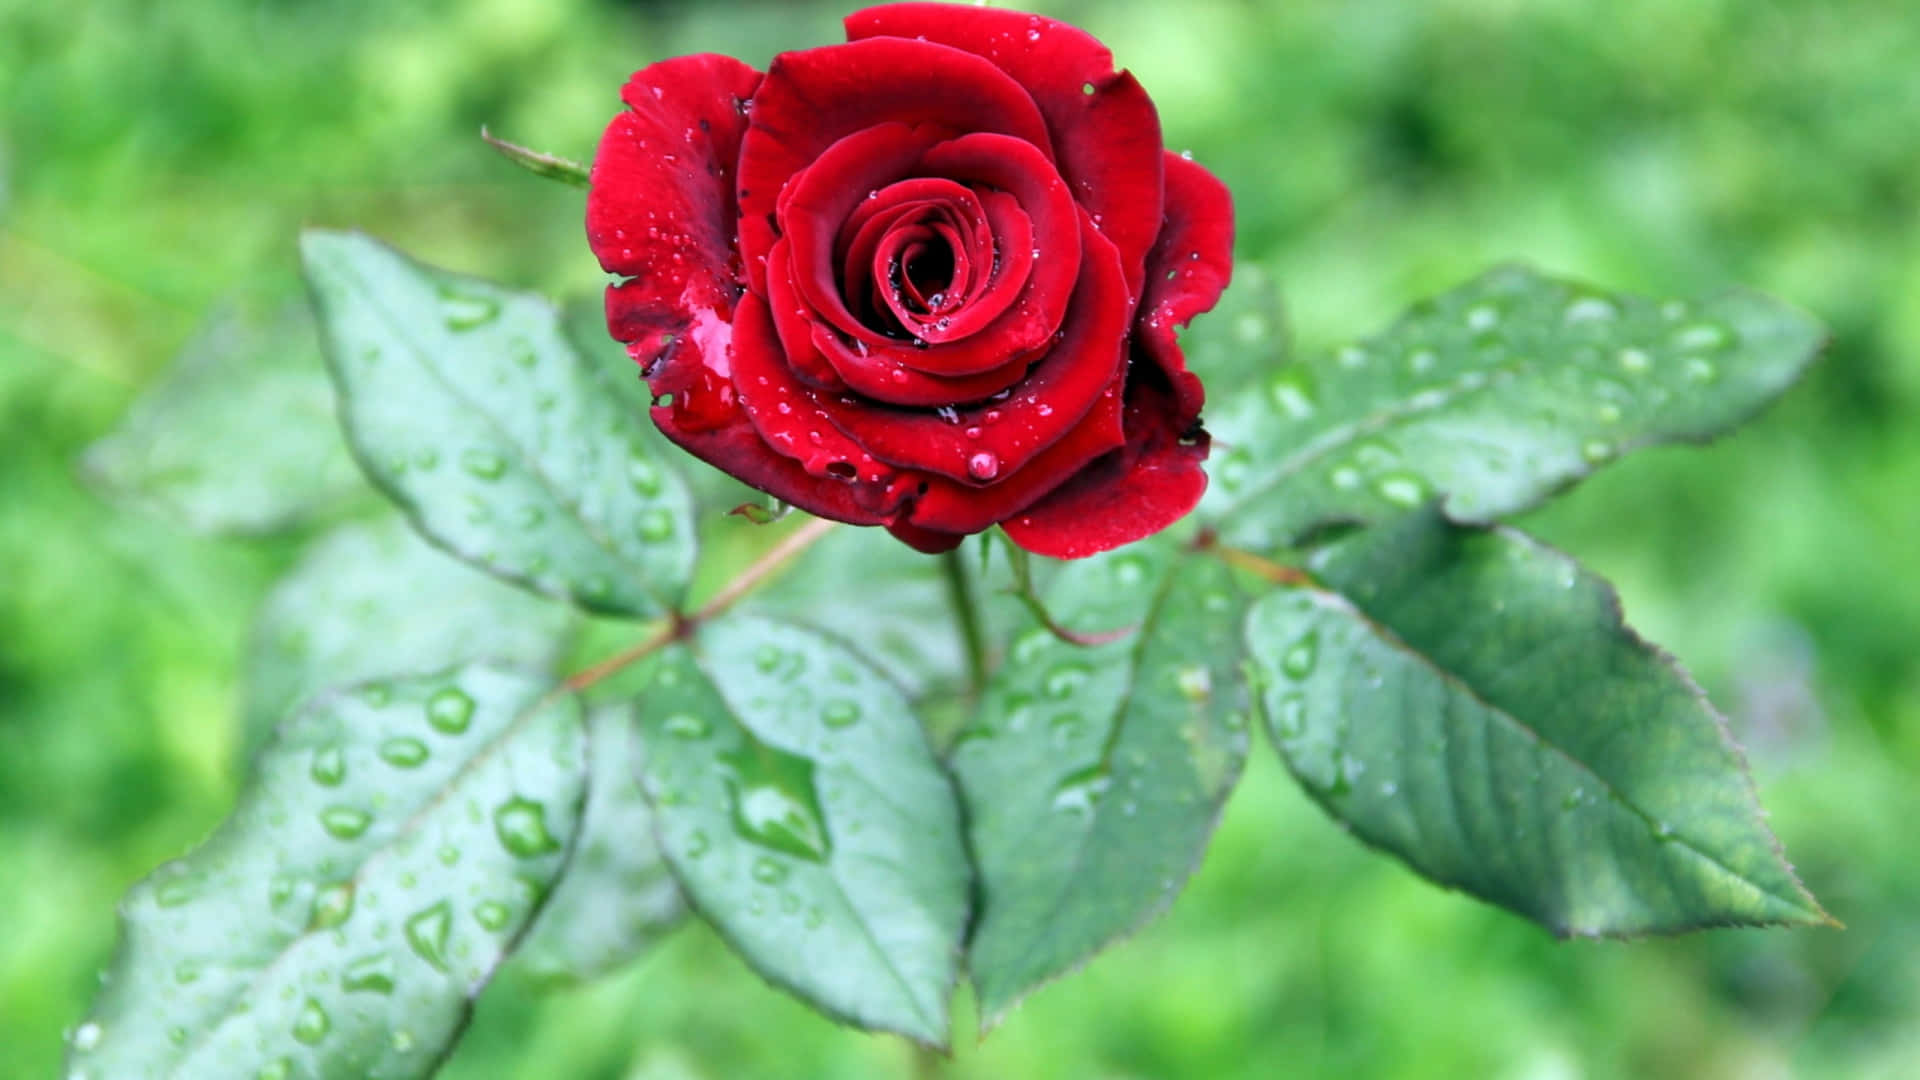 A Red Rose With Water Droplets On It